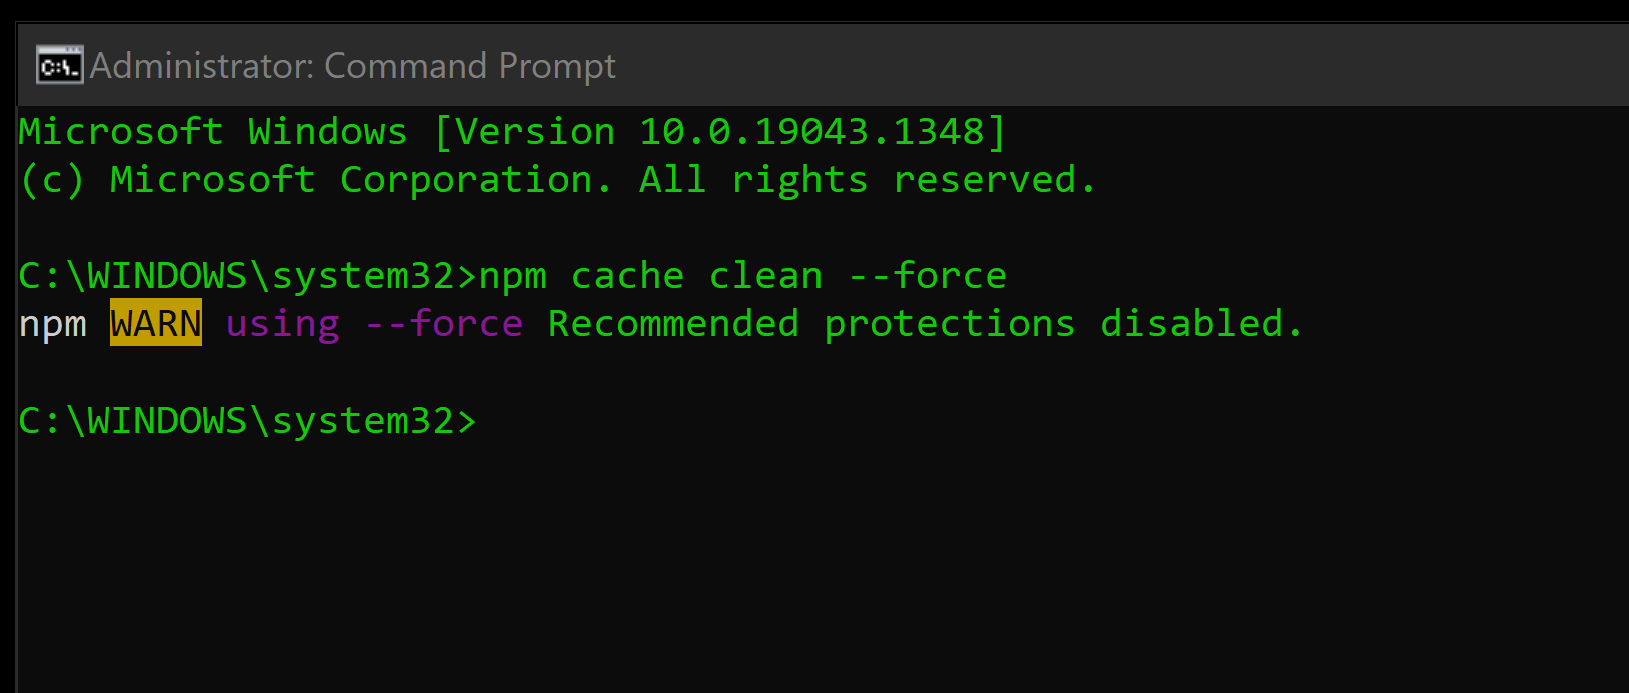 Command to force clean cache